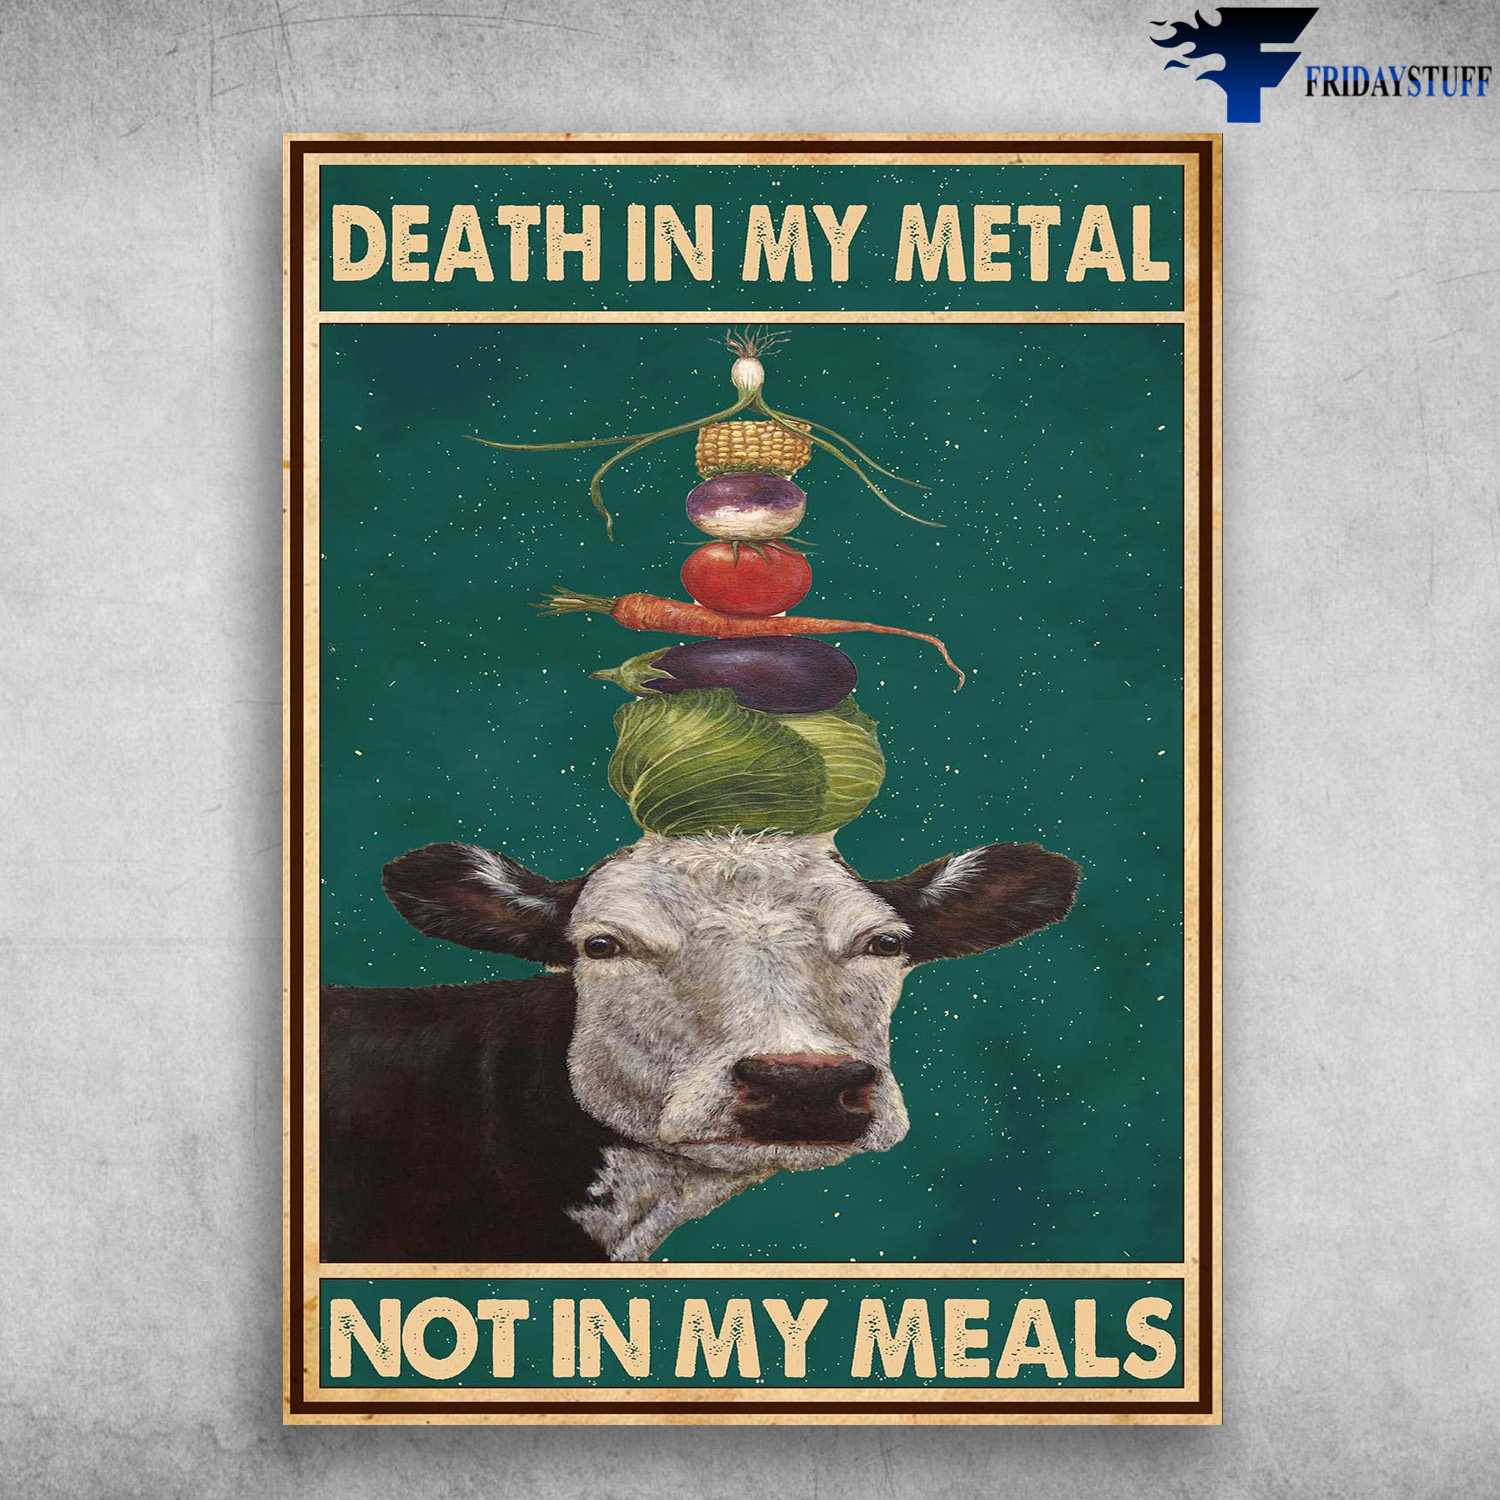 Farm Cow, Cow Poster, Death In My Metal, Not In My Meals